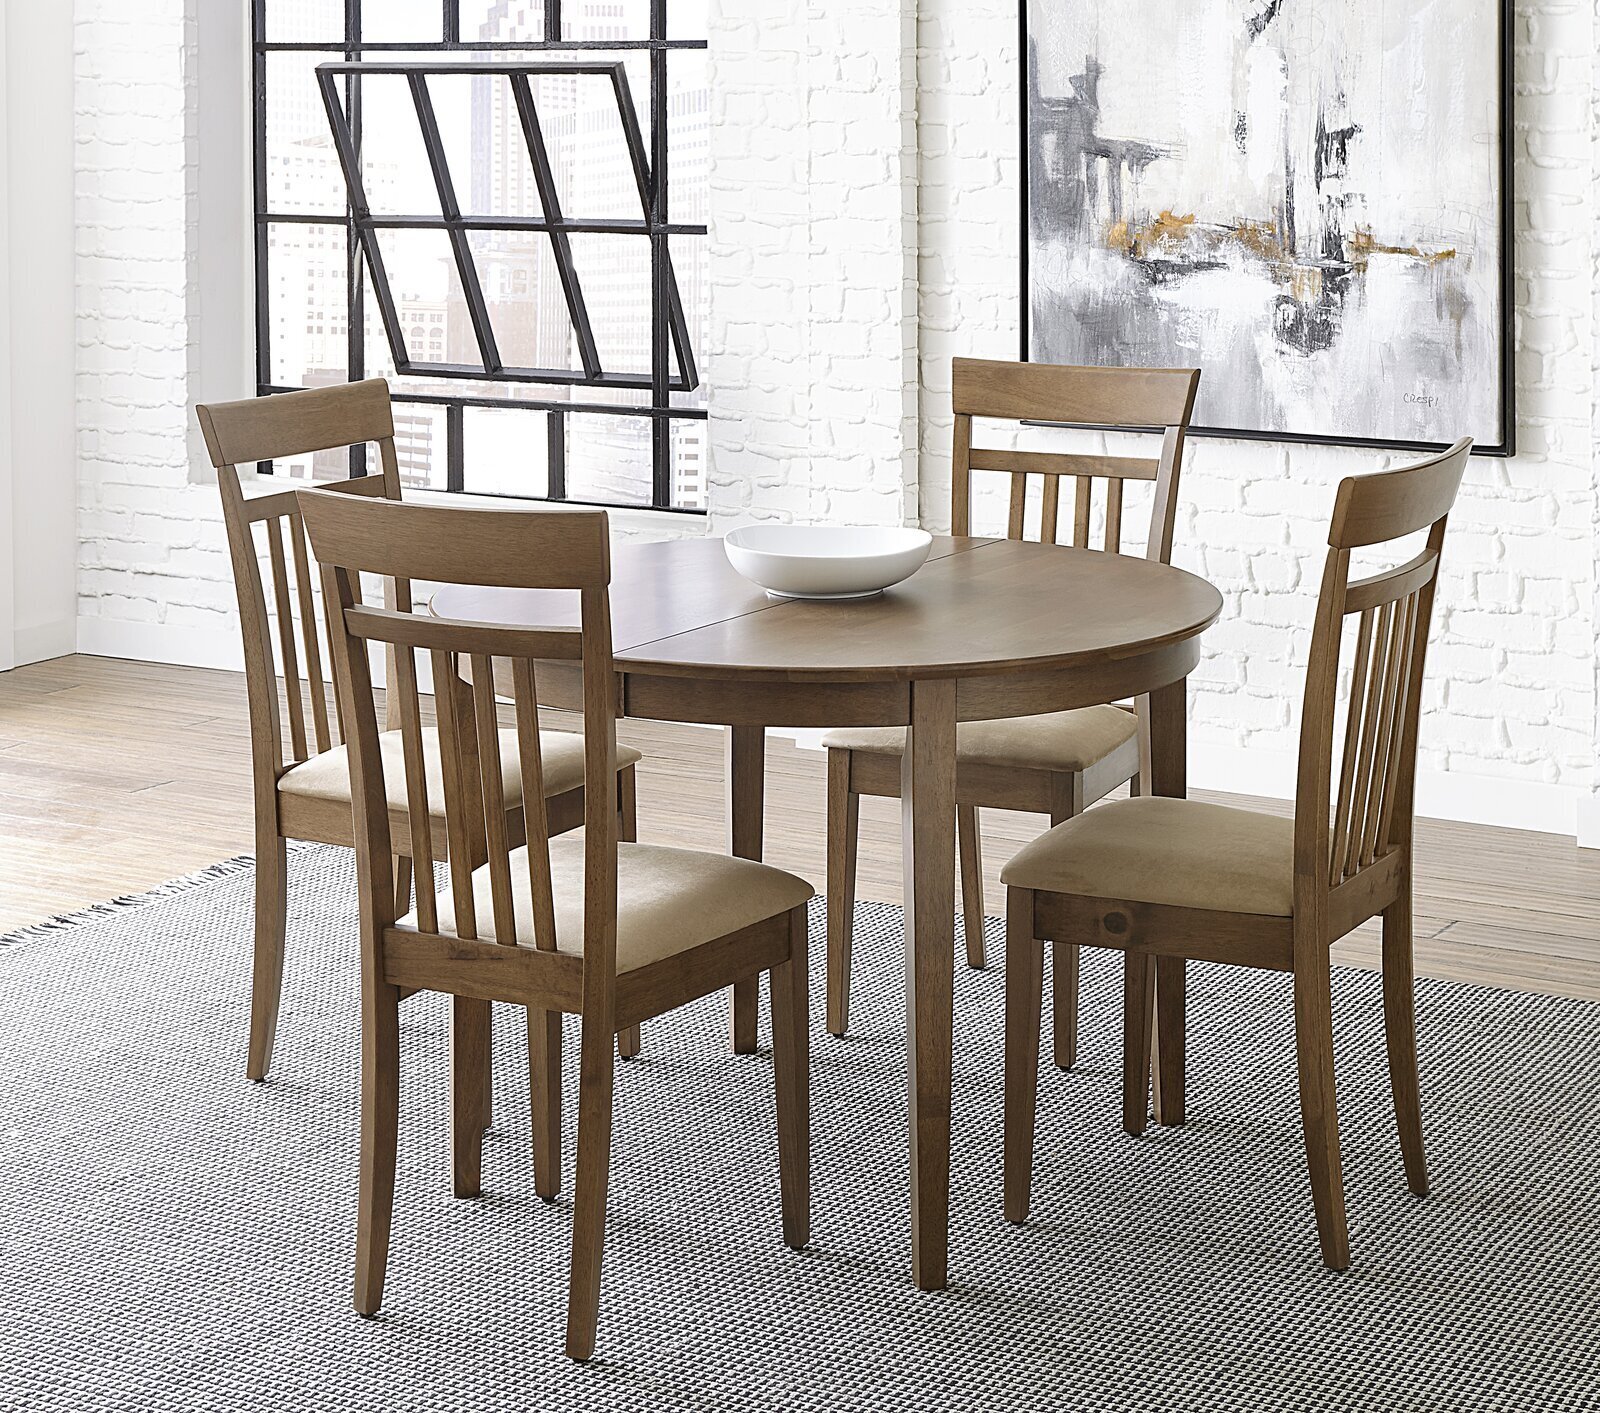 Versatile round dining table set with leaf